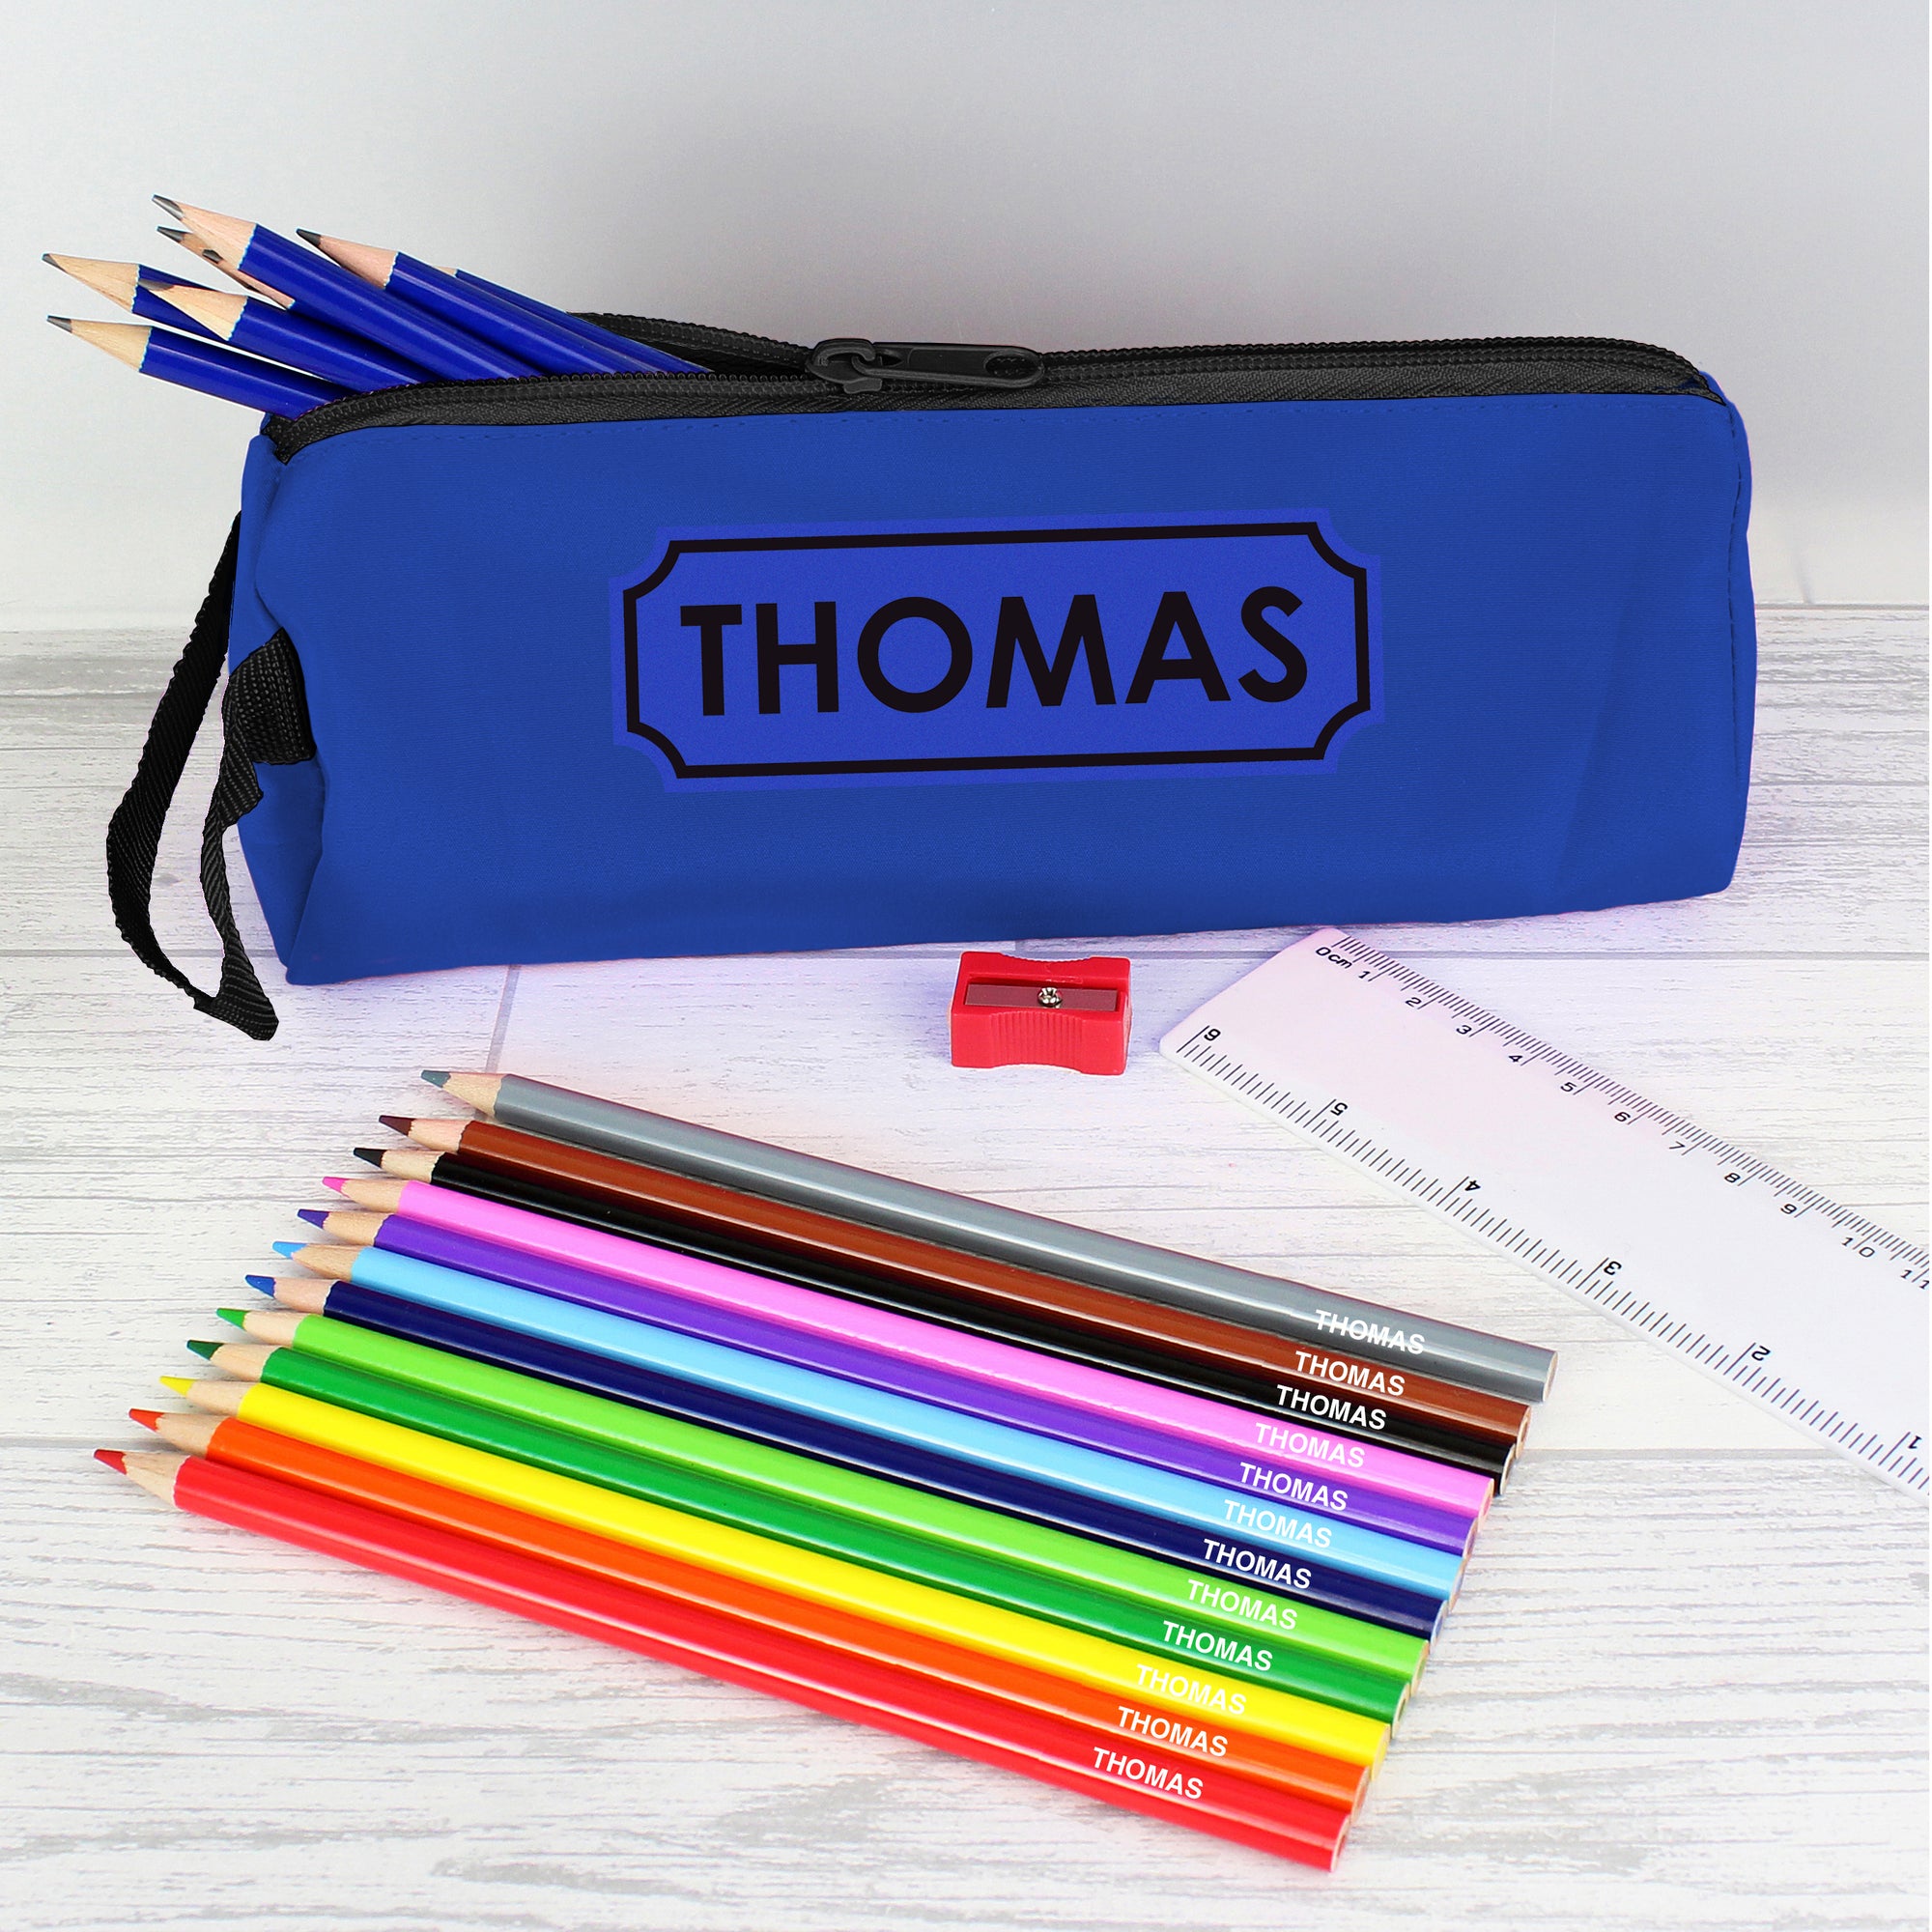 Personalised blue pencil case with personalised colouring and HB pencils plus a ruler and pencil sharpener